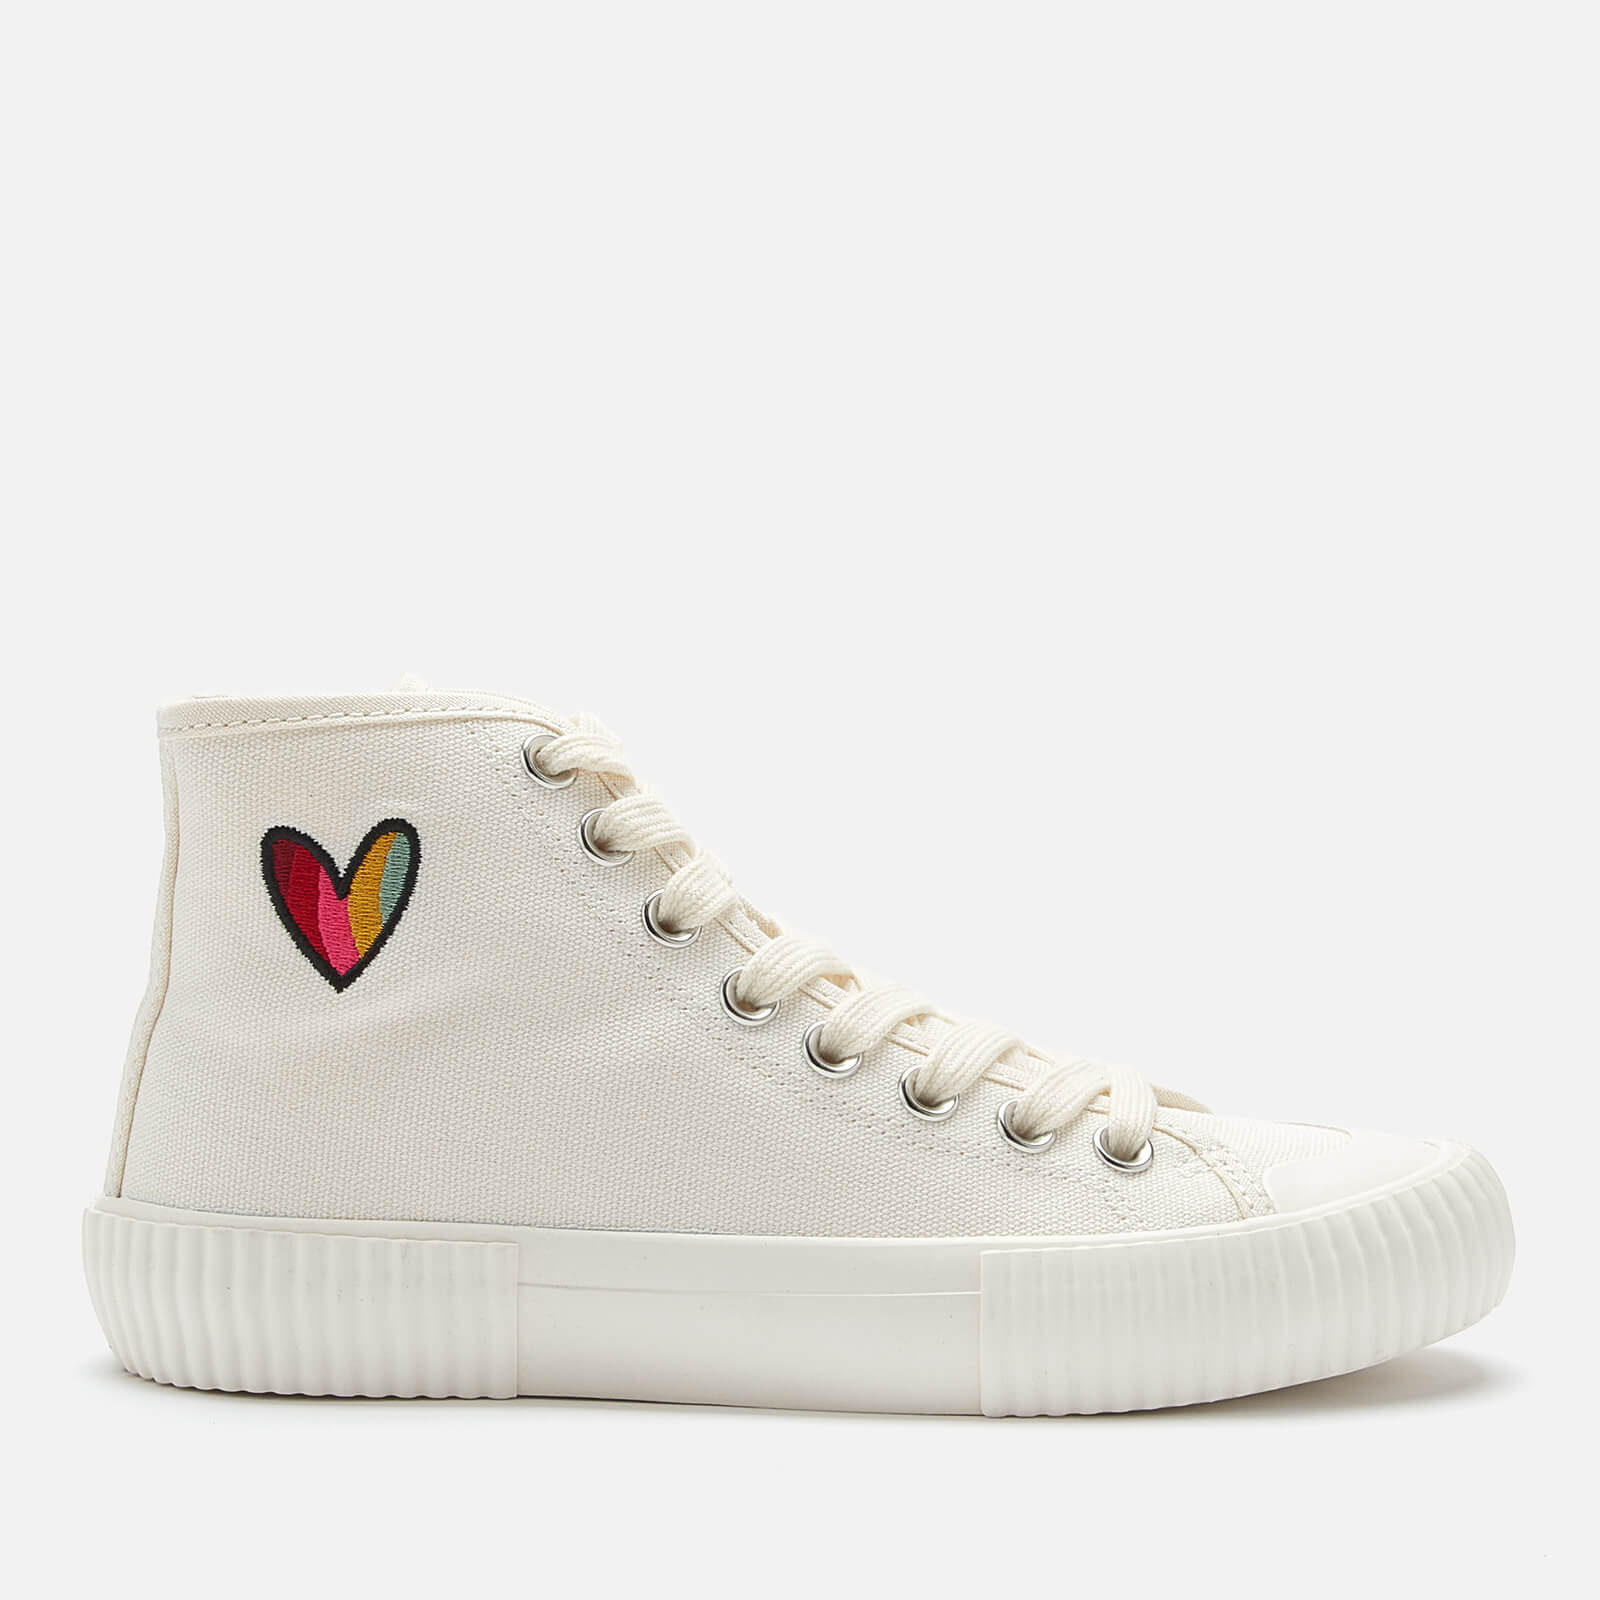 Paul Smith Women's Kibby Hi-Top Trainers - Off White Heart - UK 3